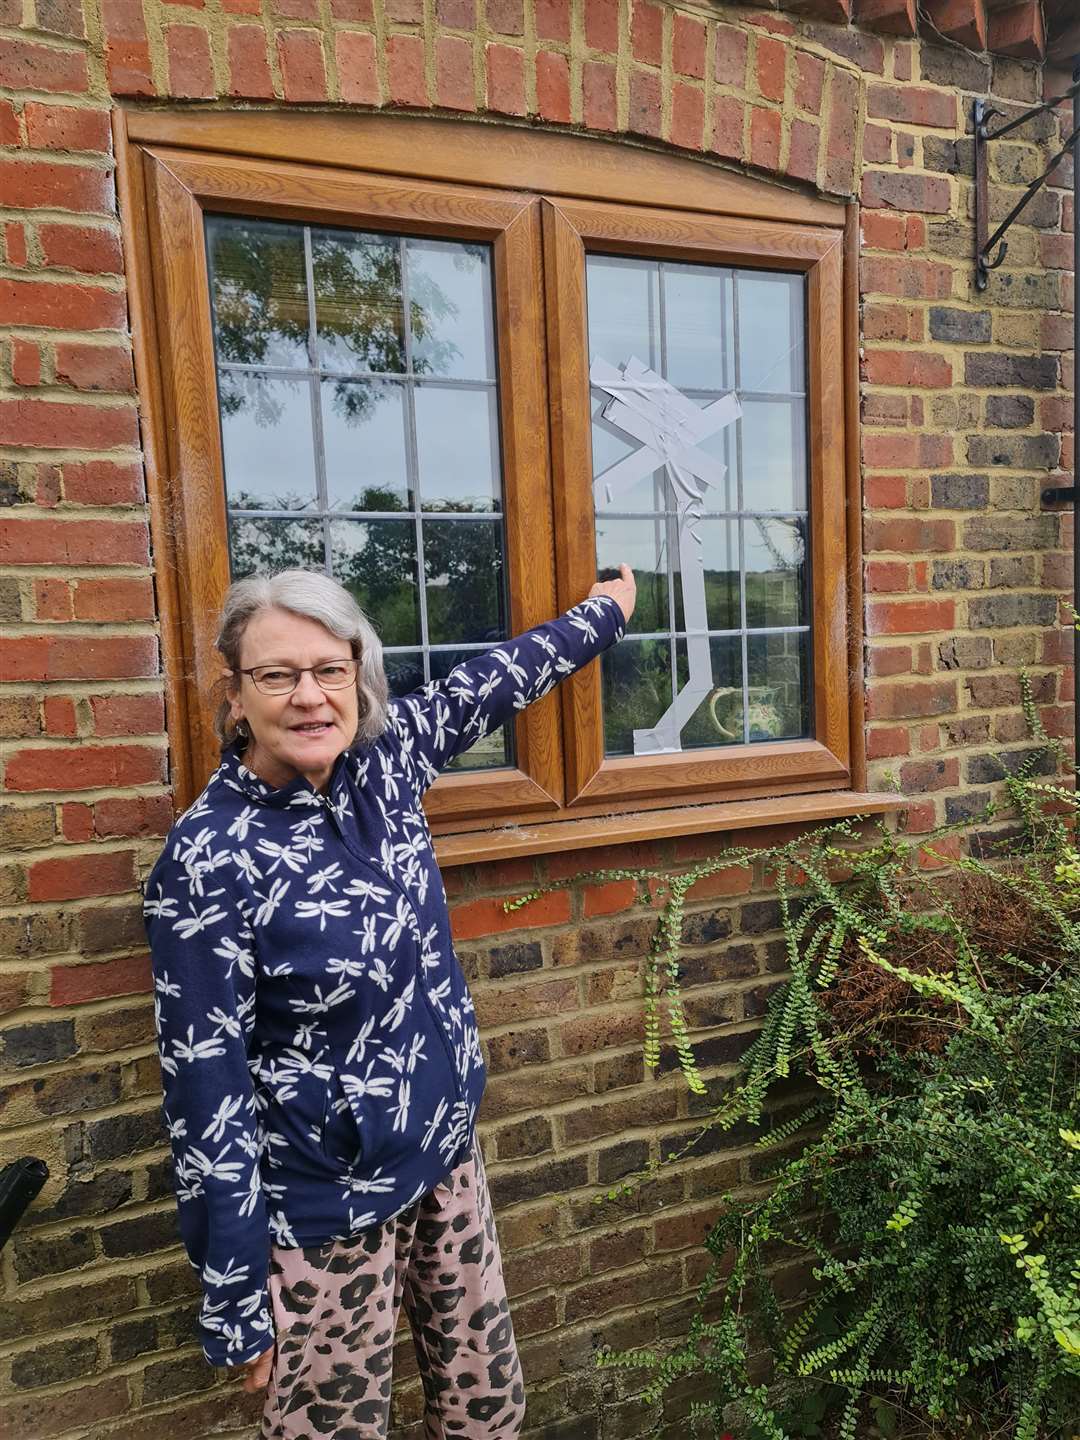 Jacqui Frances says her window was damaged by a catapult